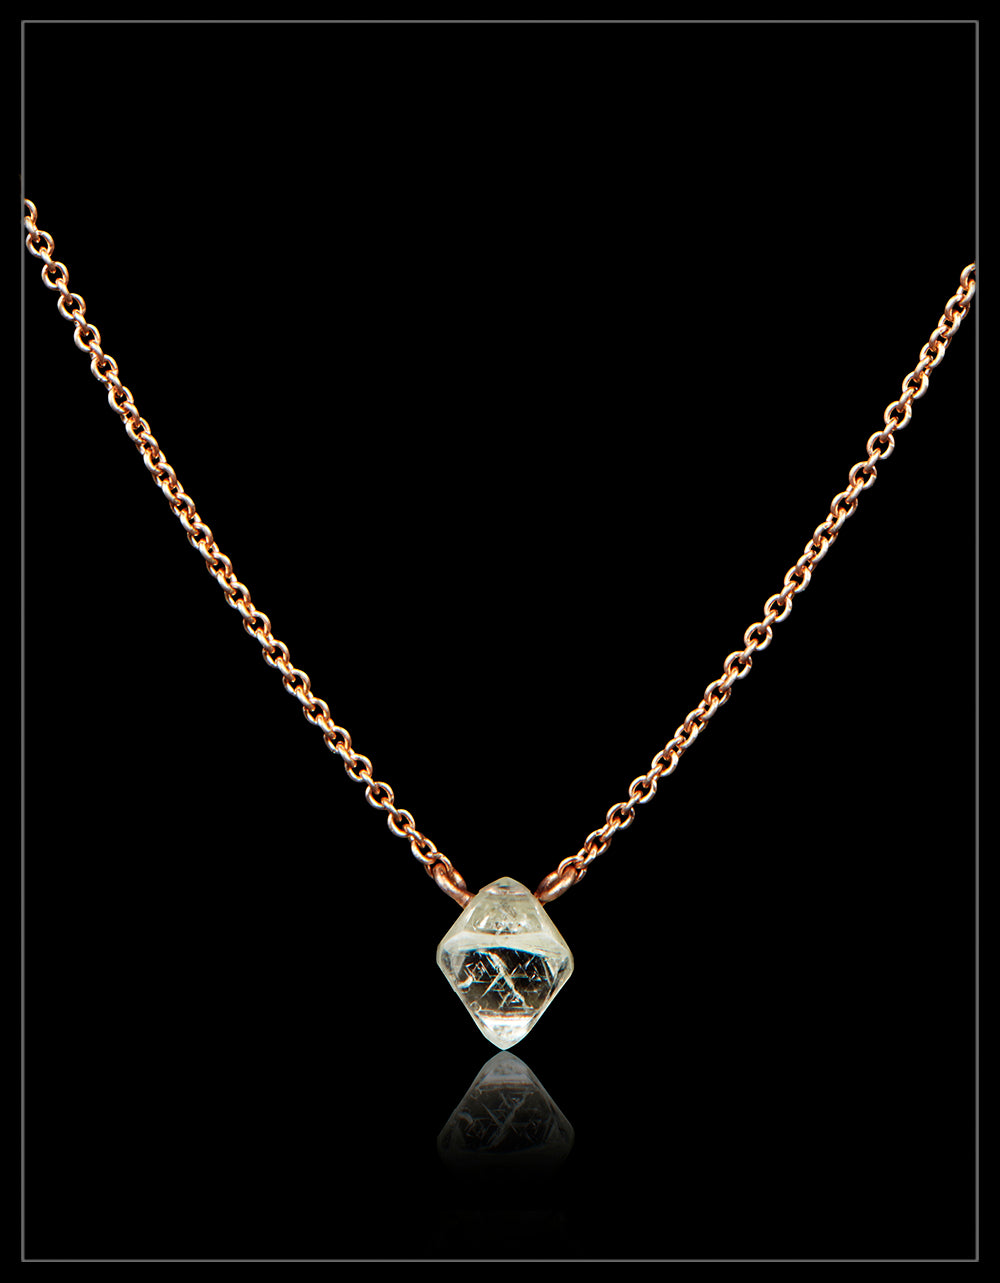 Natural Octahedron Diamond Necklace – 0.82 ct.